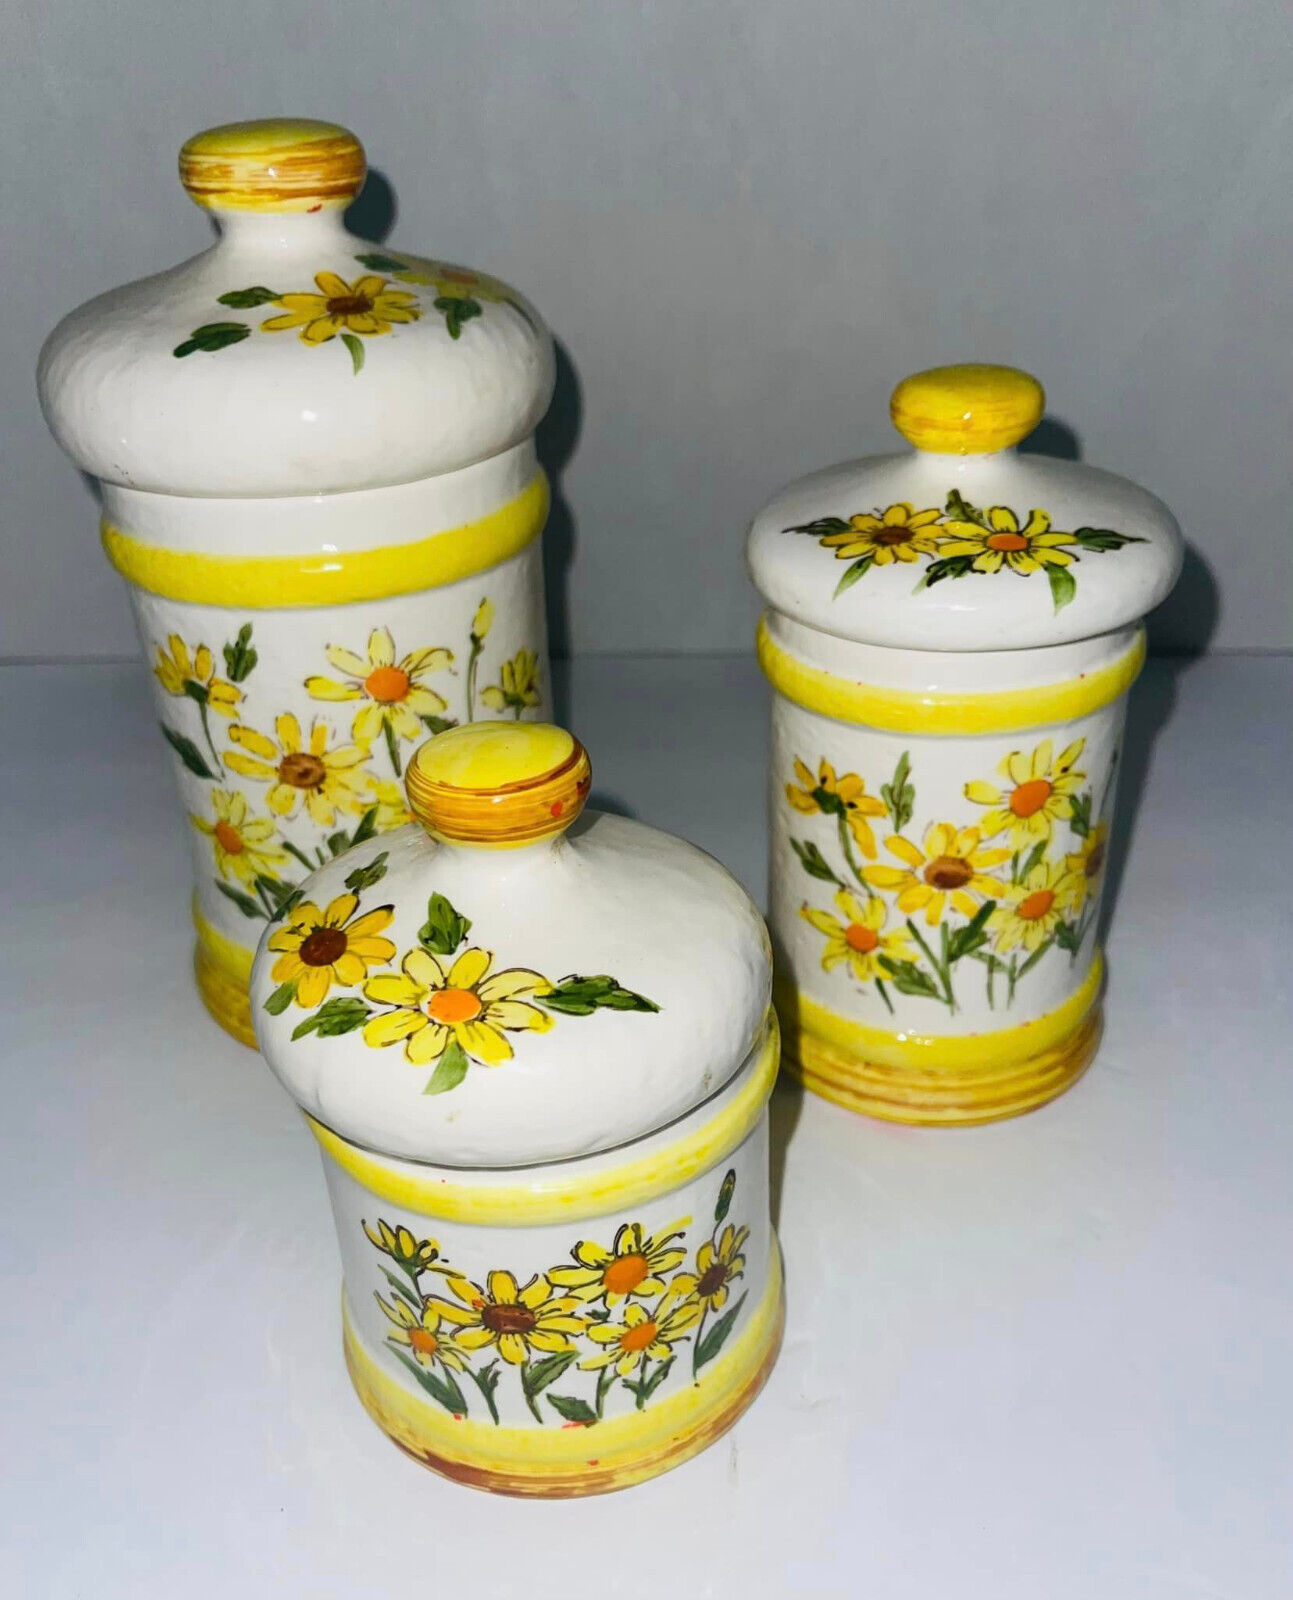 1978 Sears Roebuck & Co. 3 Piece Set-- Cookie Jar Canister Set Yellow Daisies